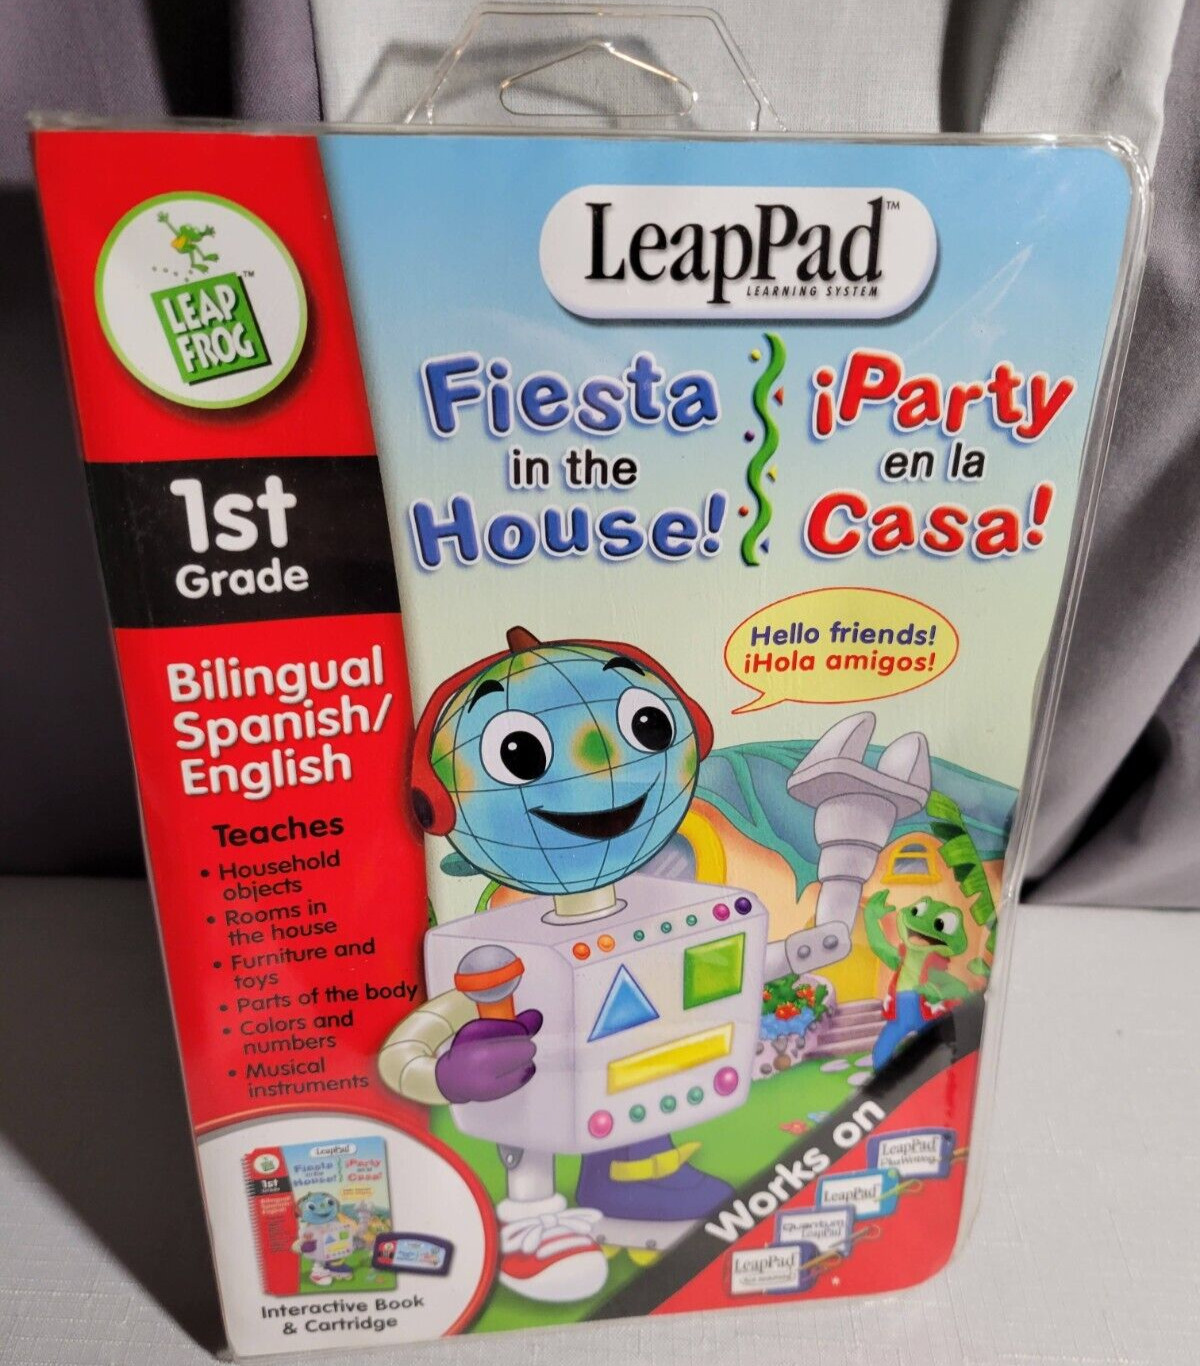 LeapPad Learning System 1st Grade Bilingual English Spanish Fiesta in the House